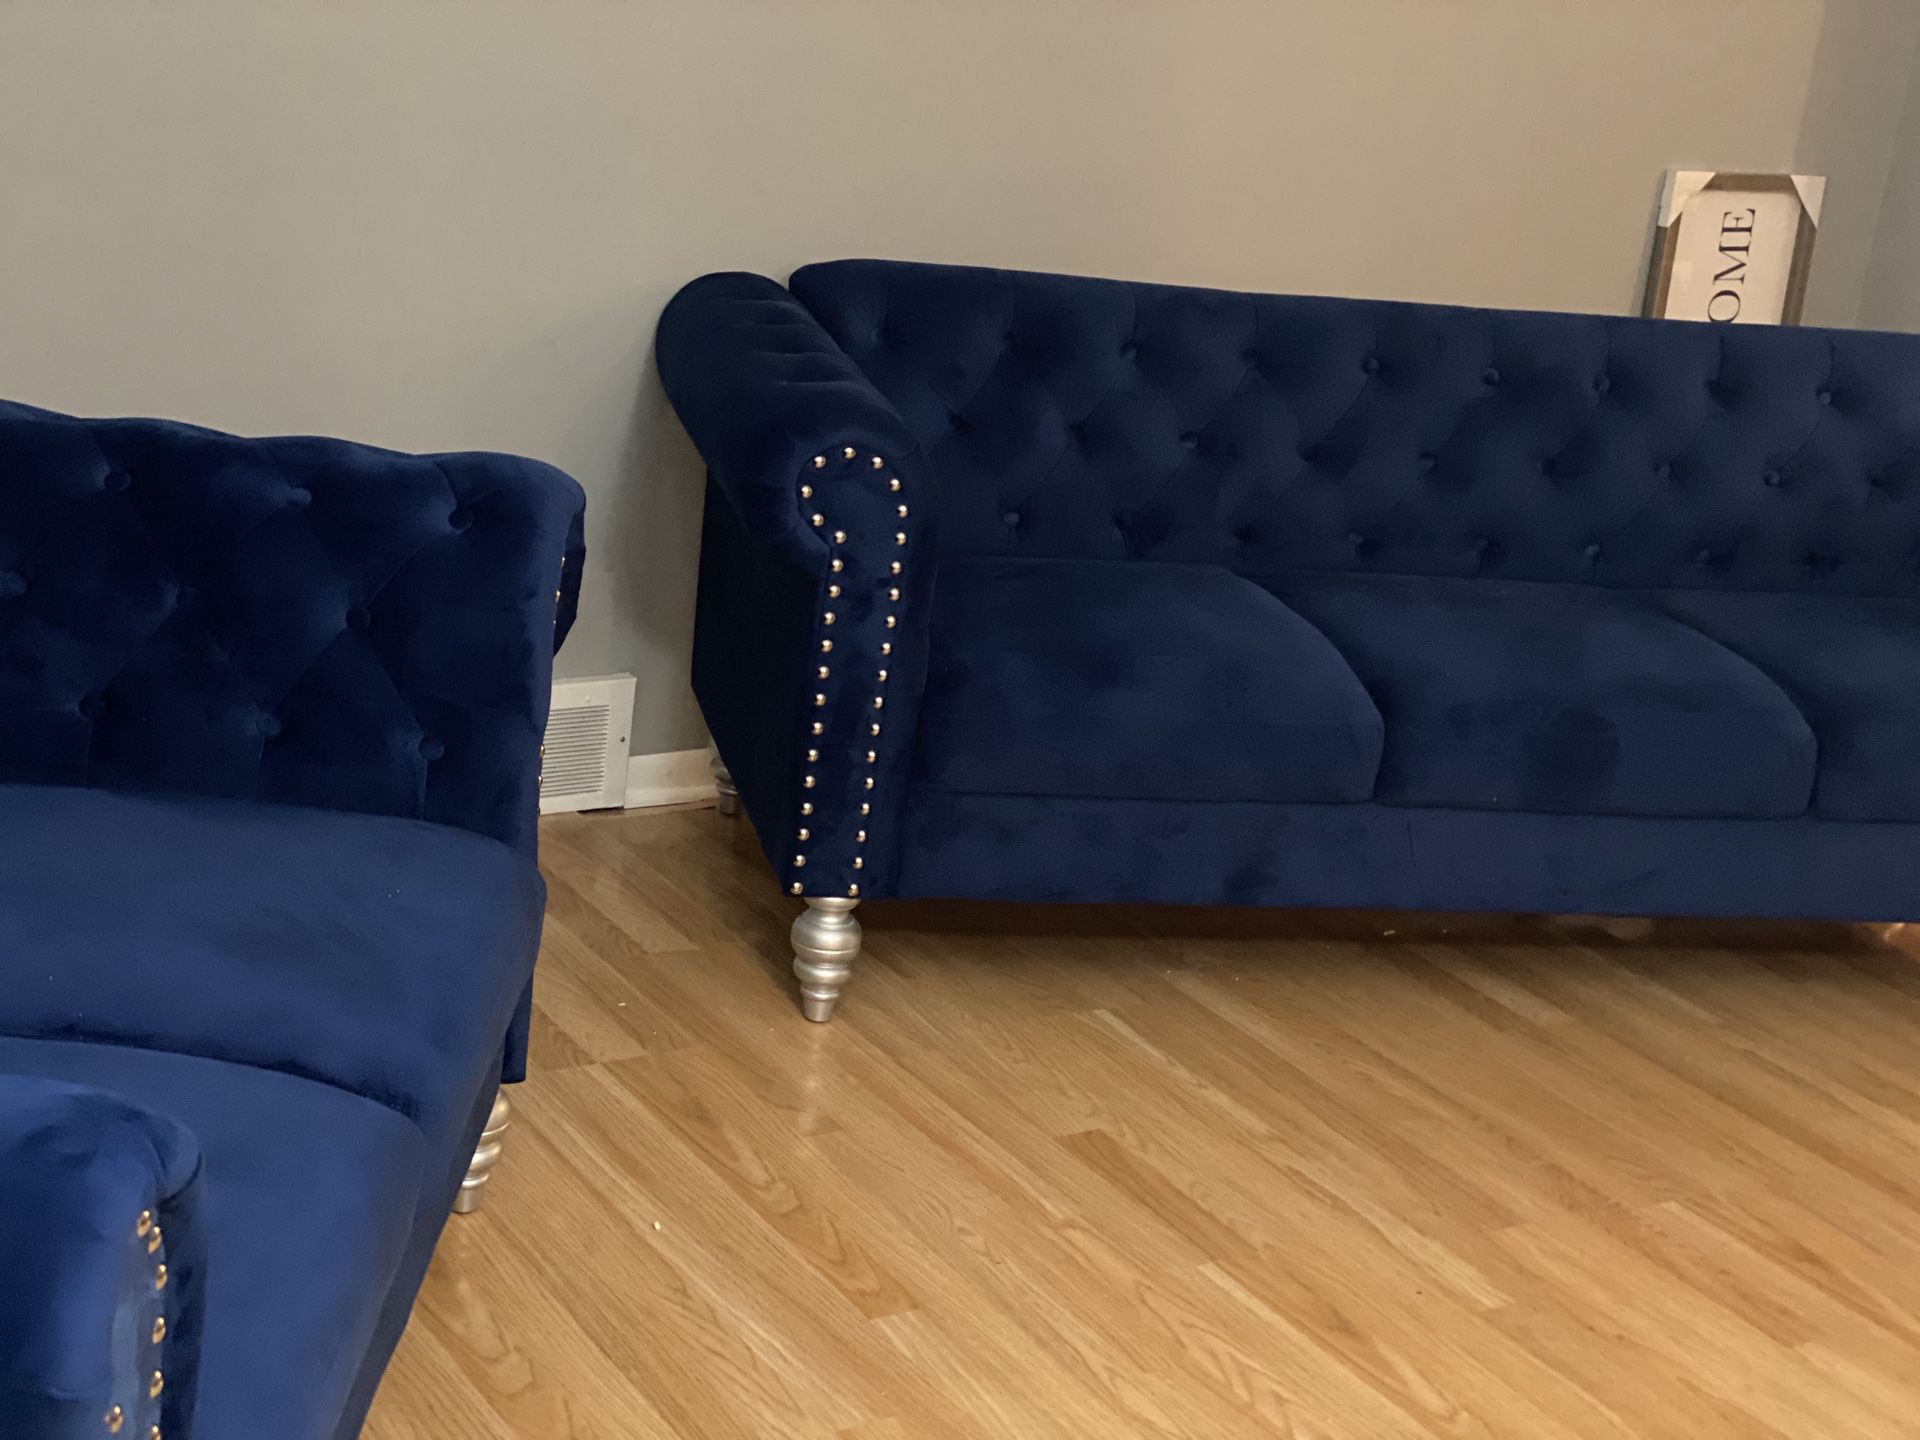 Navy blue chesterfield sofa and love seat from Wayfair